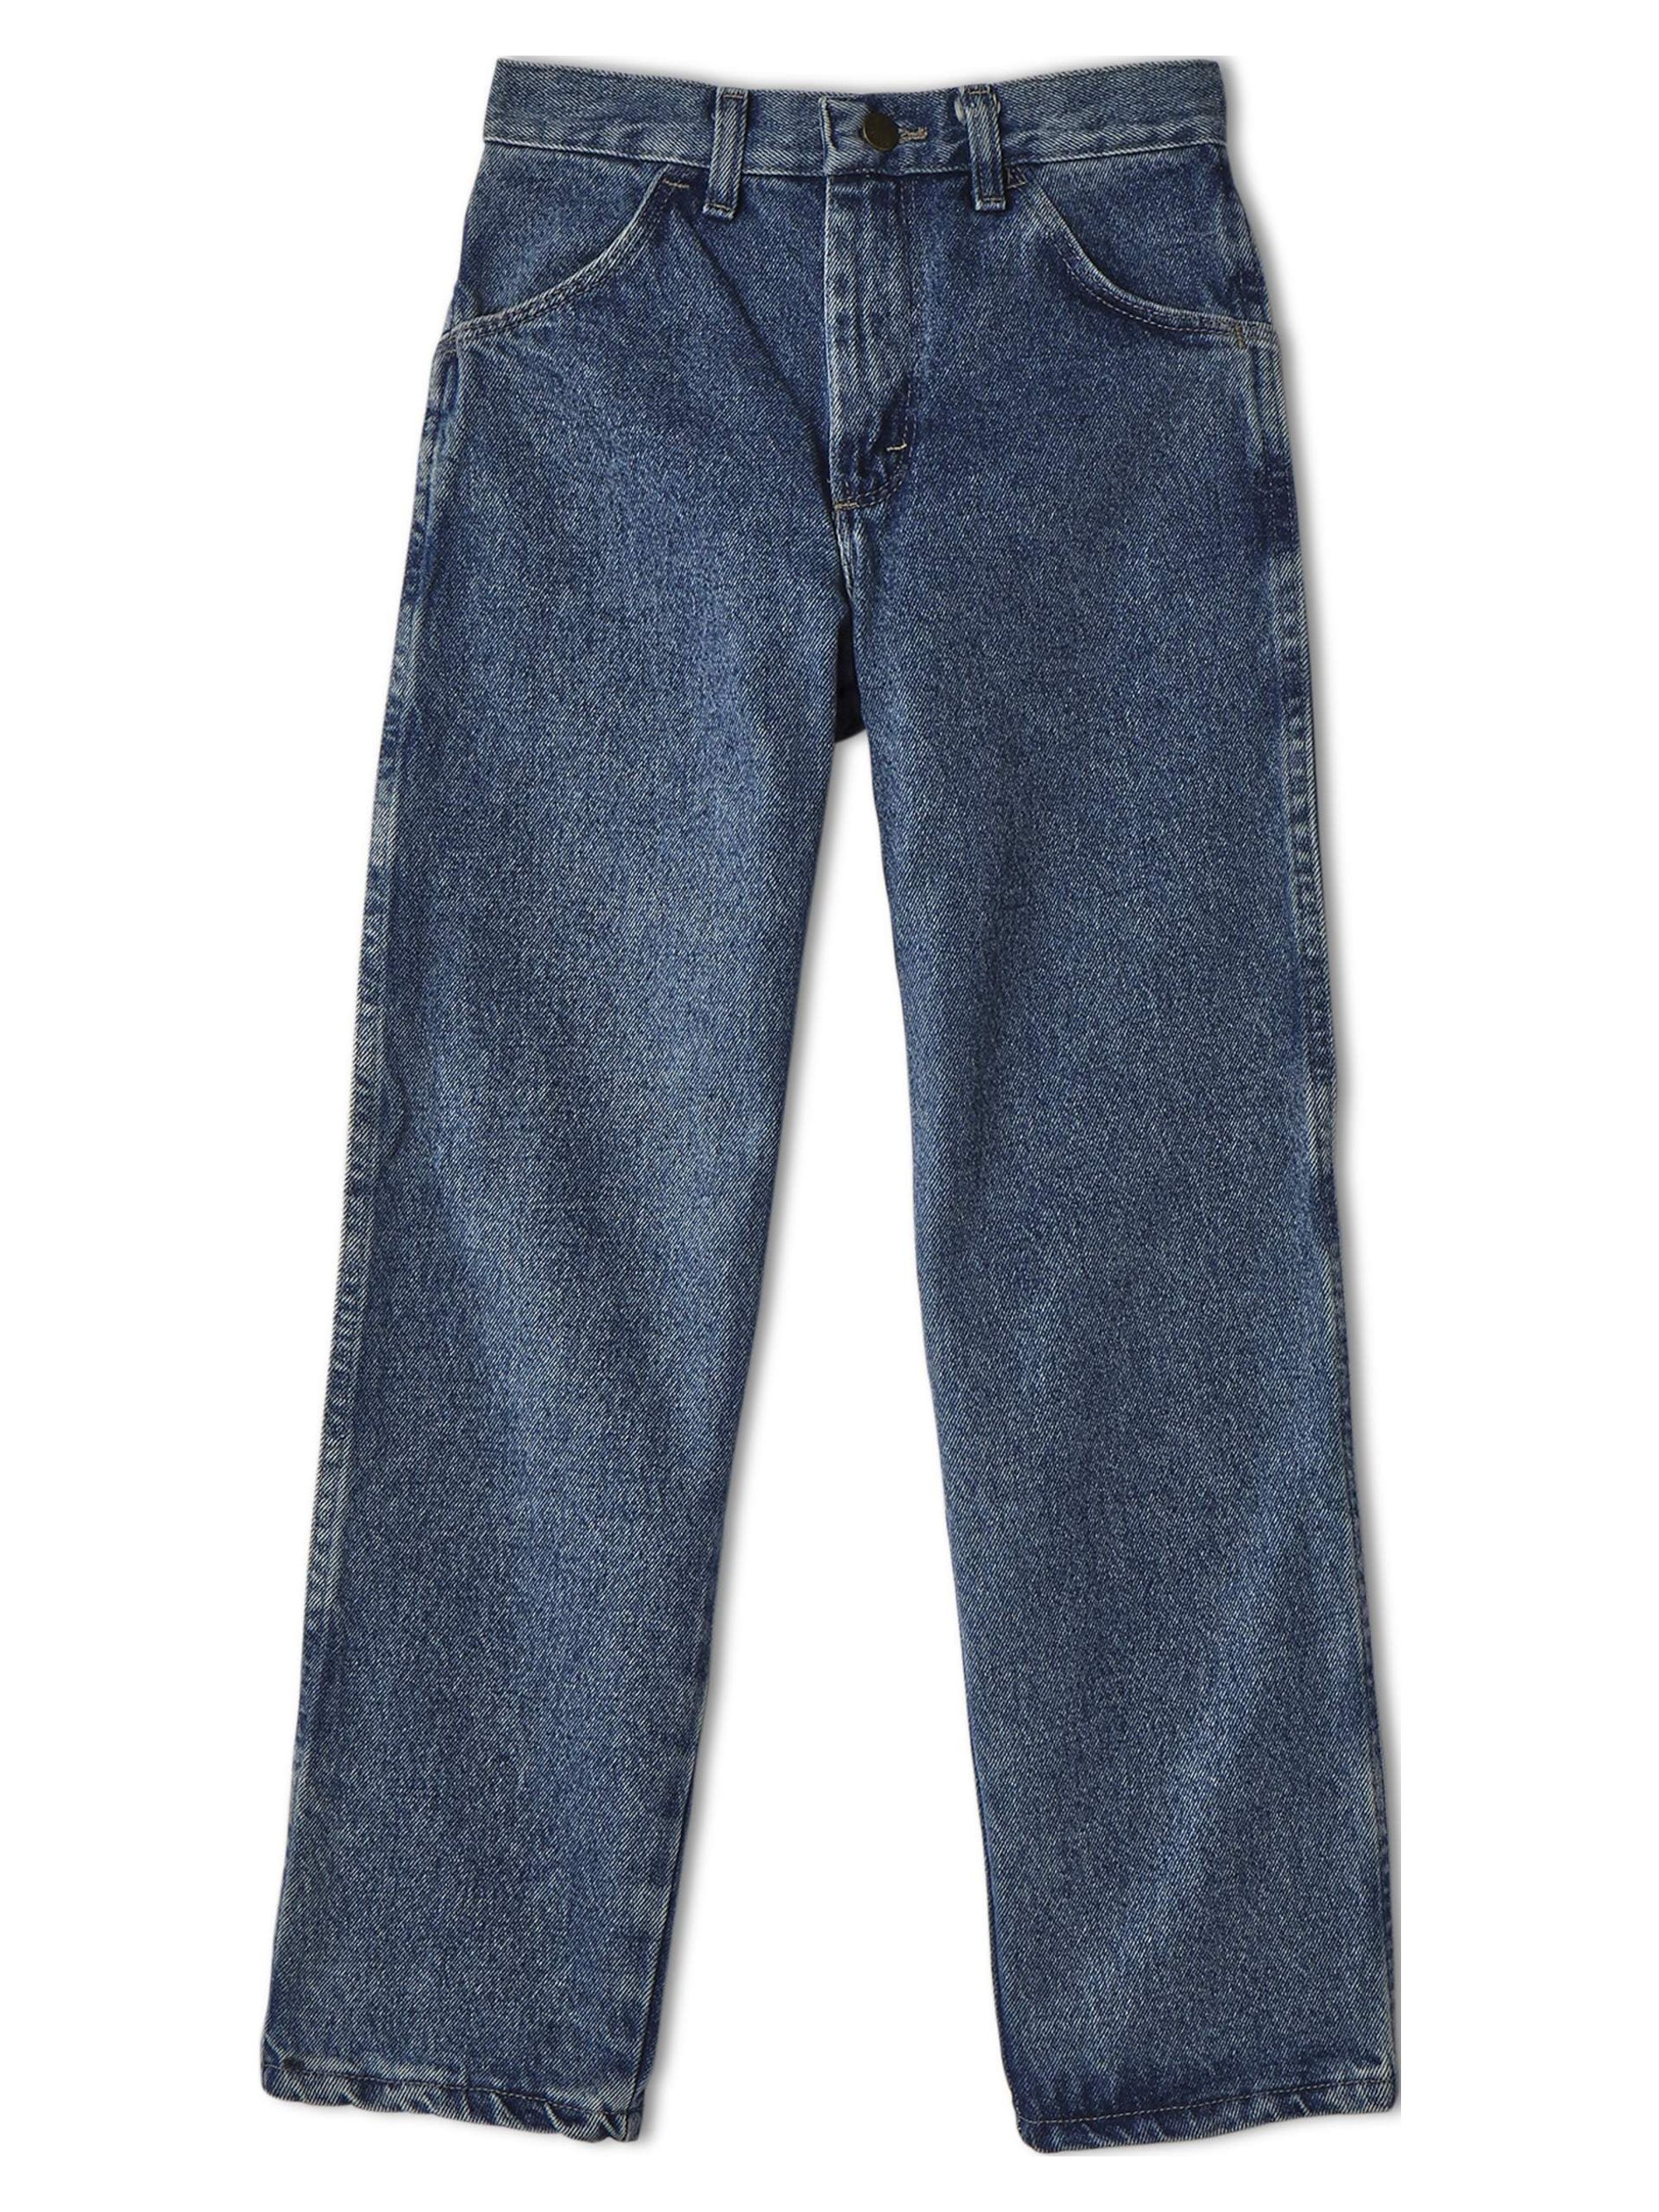 Rustler Boys Relaxed Fit Jeans, Sizes 4-16 & Husky - image 1 of 5